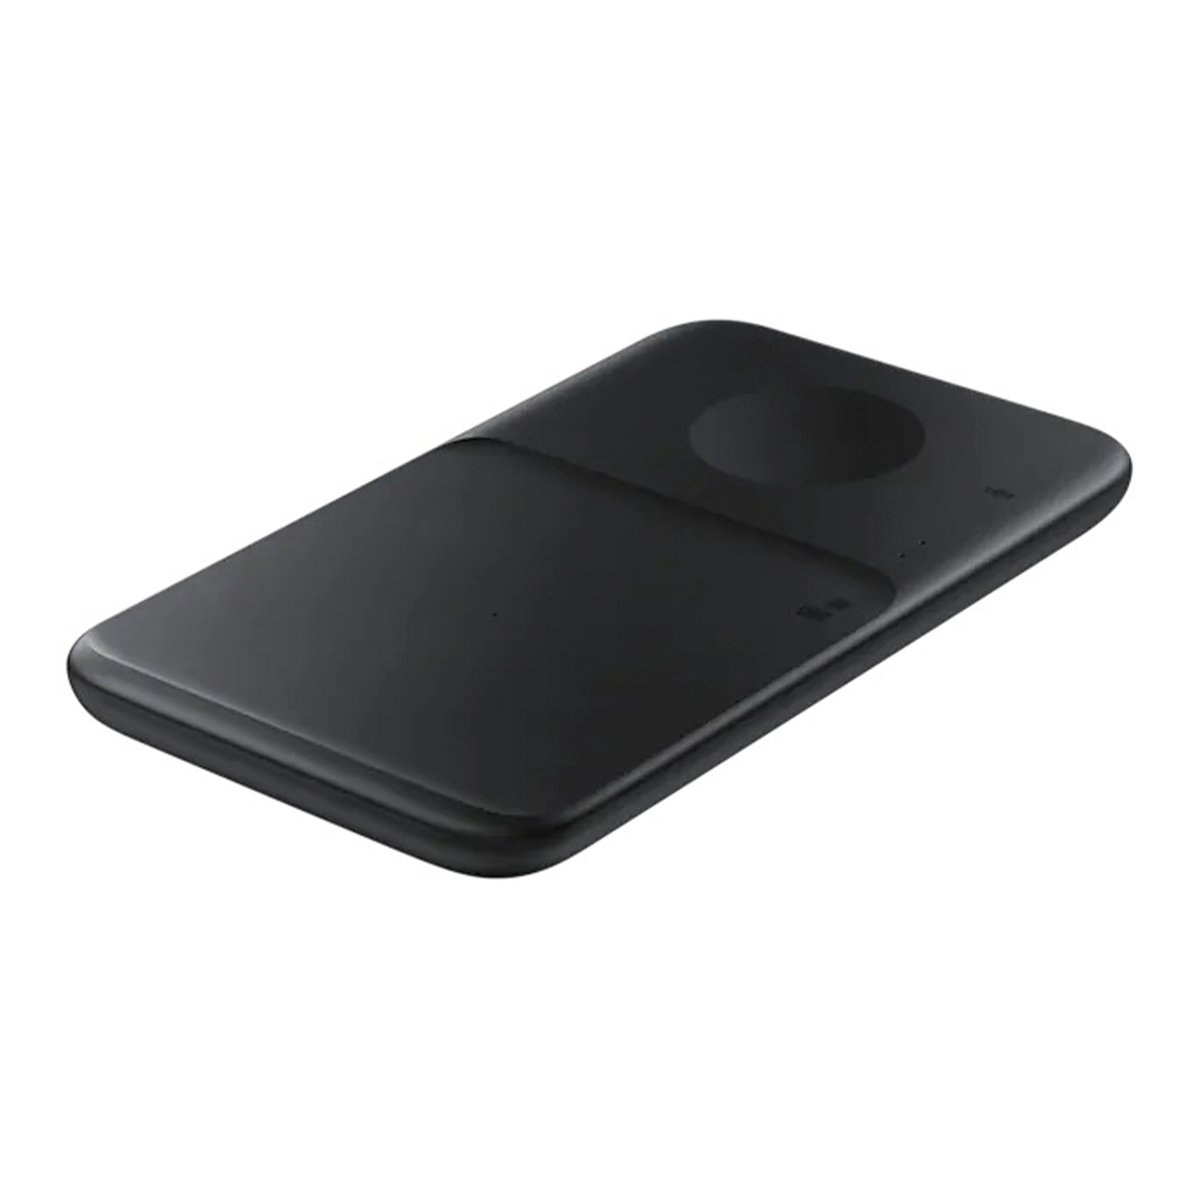 Samsung Wireless Charger Duo with Travel Adaptor P4300 Black